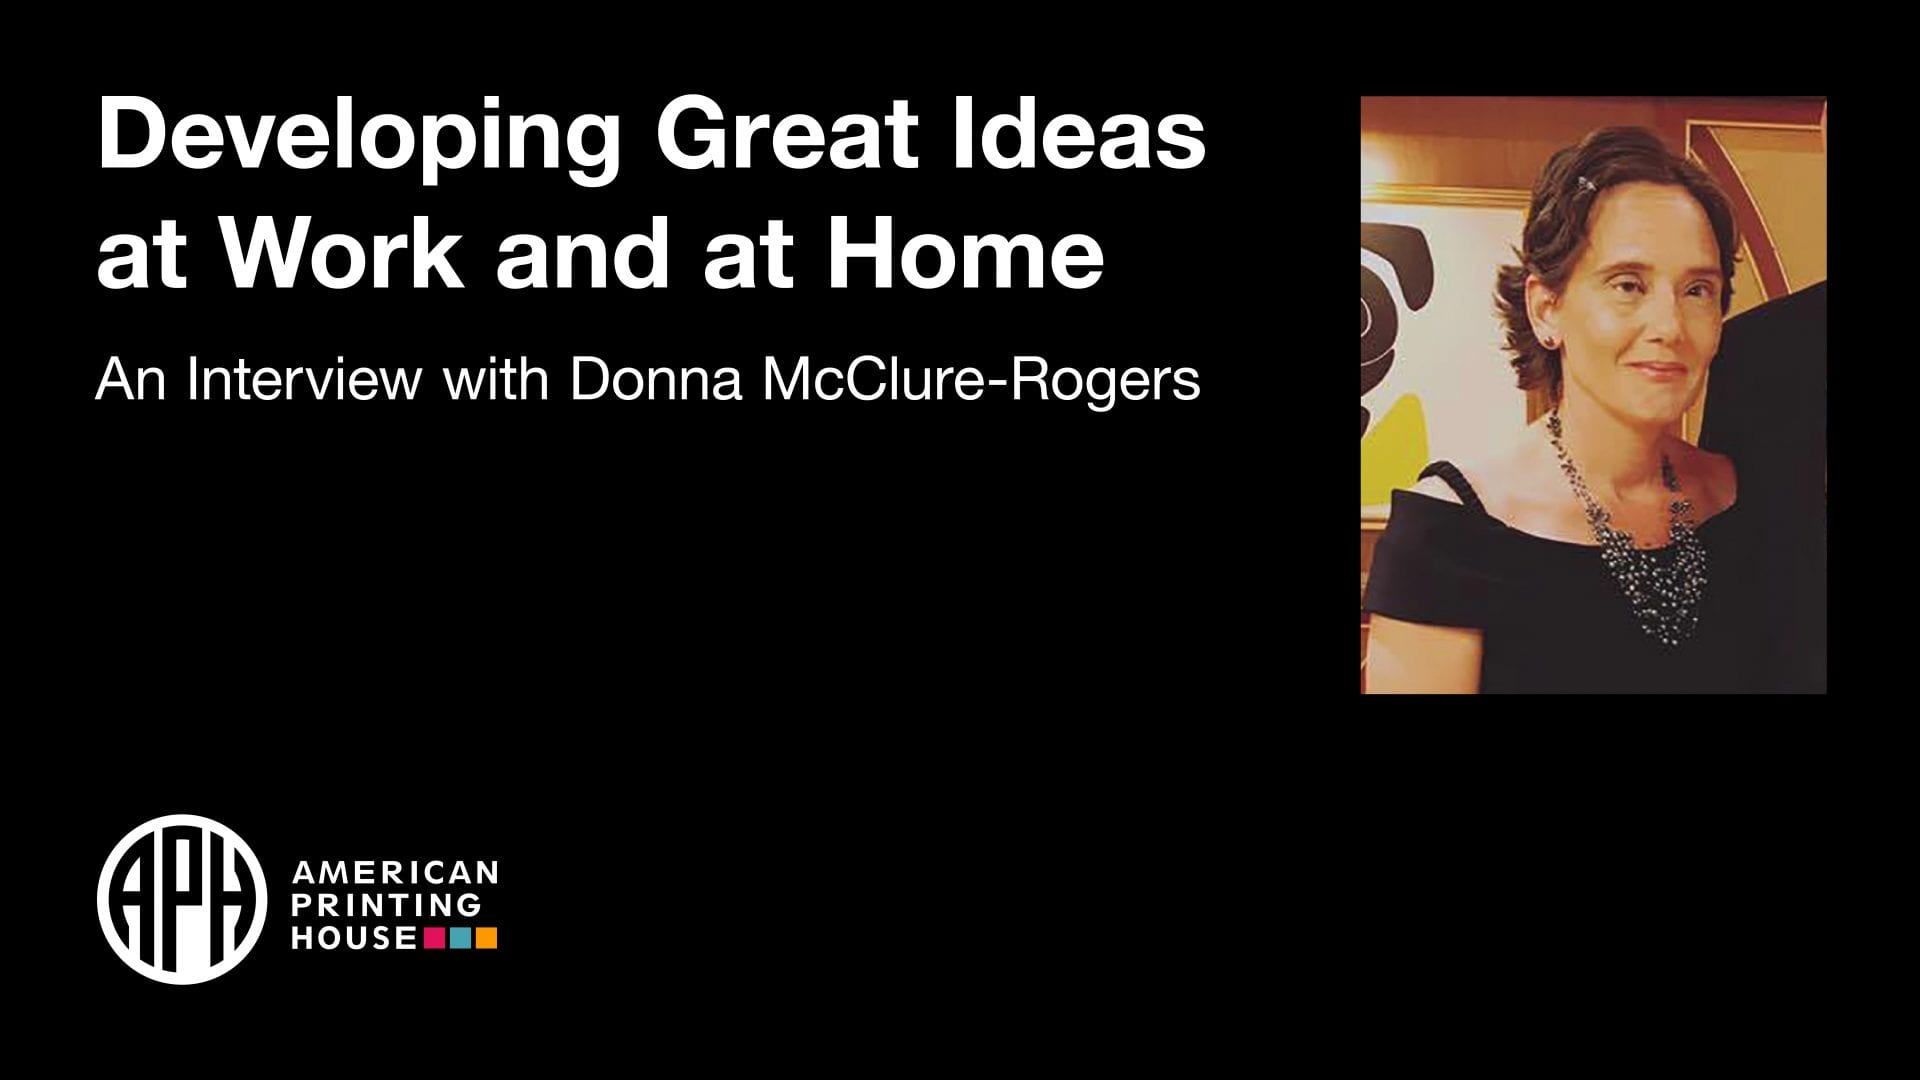 image of Donna. text reads "Developing Great Ideas at Work and at Home. An Interview with Donna McClure-Rogers." APH logo